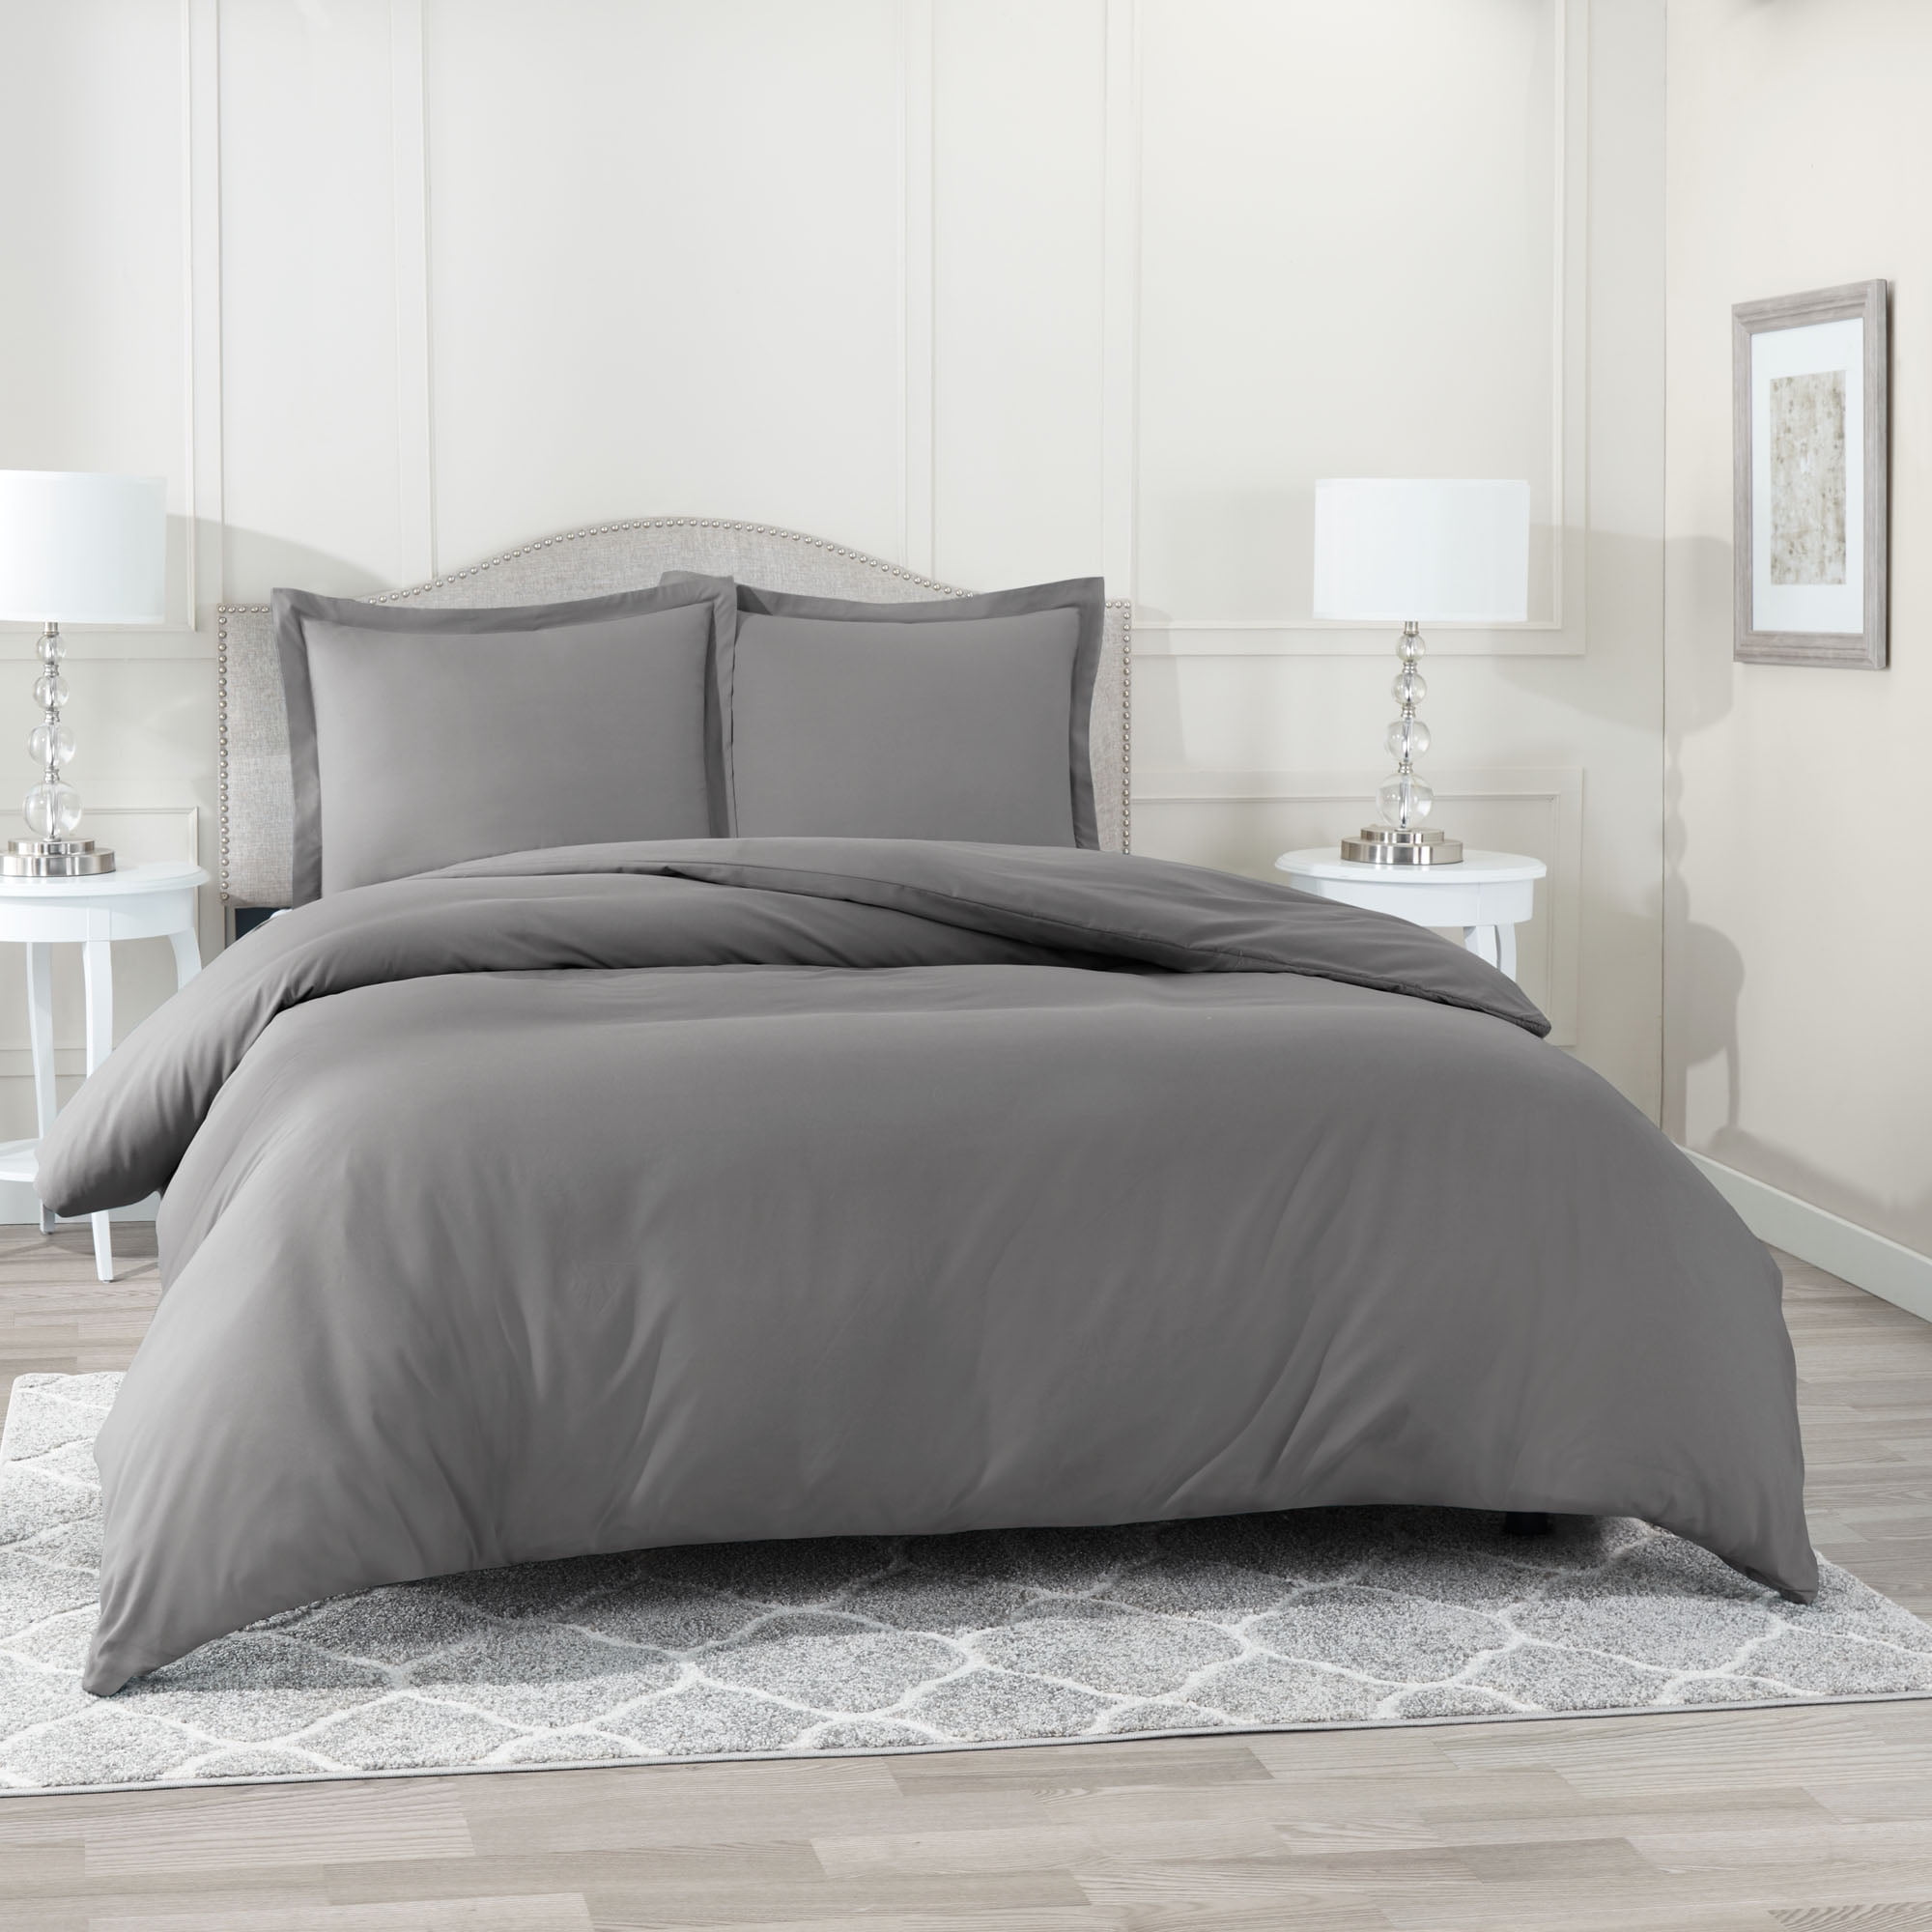 Queen 100% Brushed Microfiber Bed Sheet Set with 2 Pillow Covers Gray 